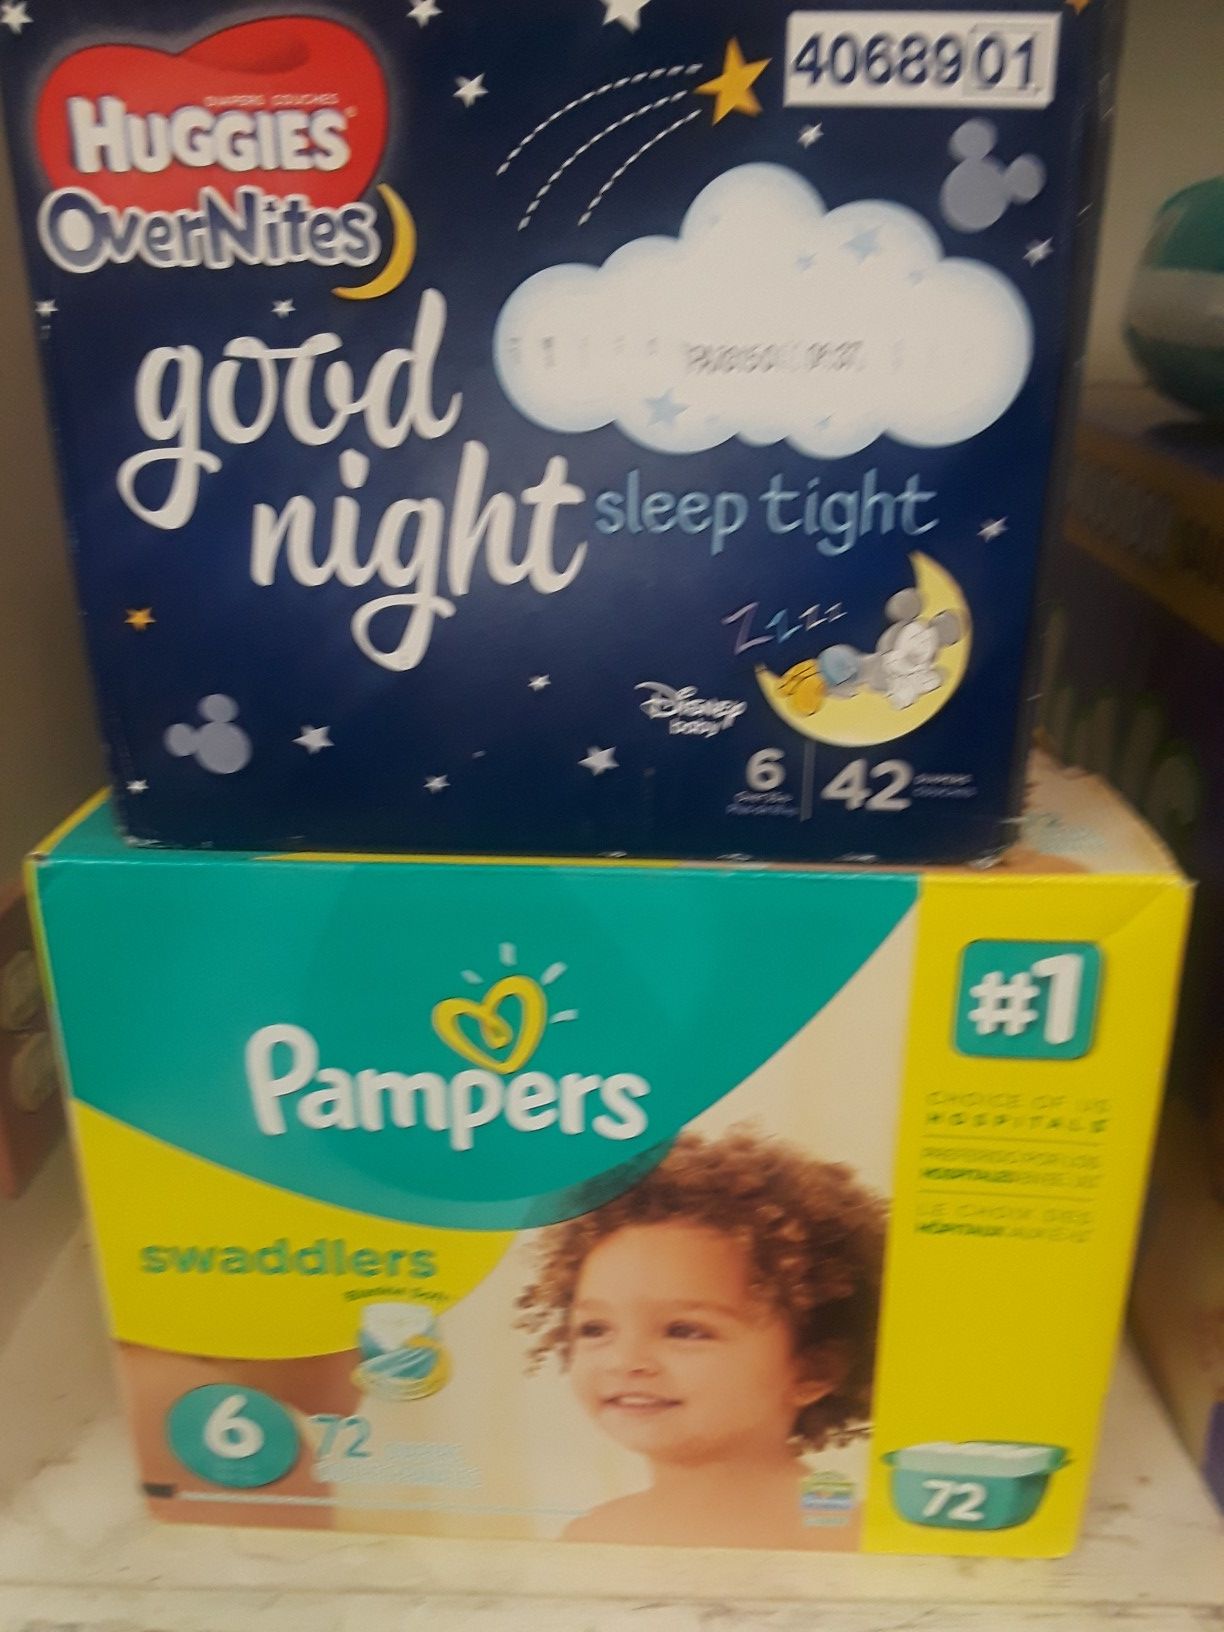 Pampers Swaddlers size 6 and Huggies overnight size 6